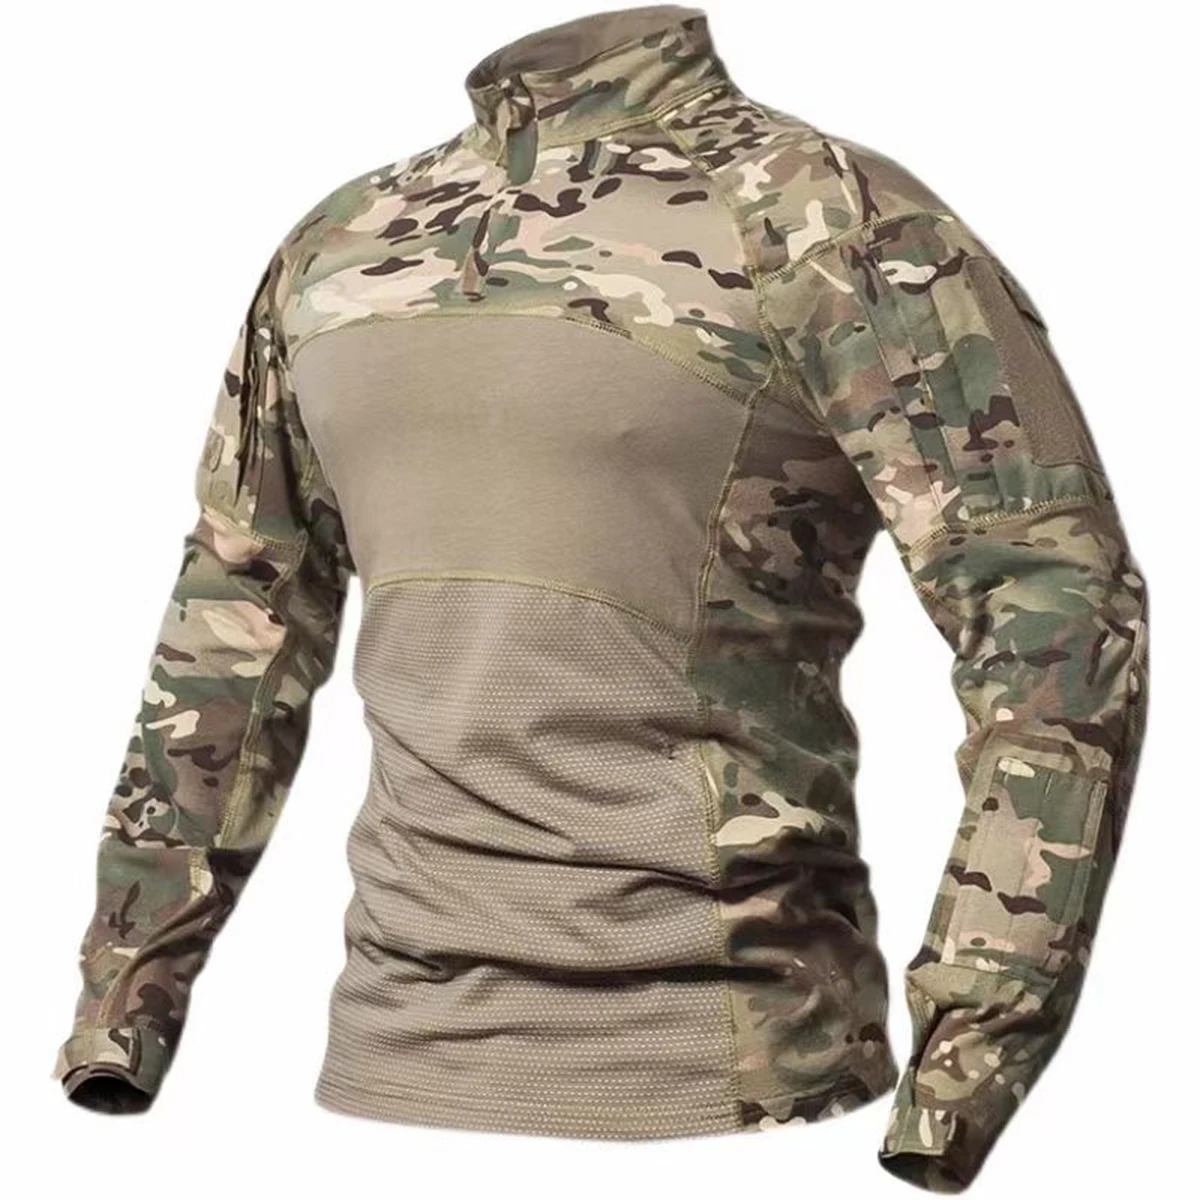 

Airsoft Military Shirt Camouflage Army Tactical Battle Combat Shirt Men Women USMC Softair Camisa Militar Special Forces Costume